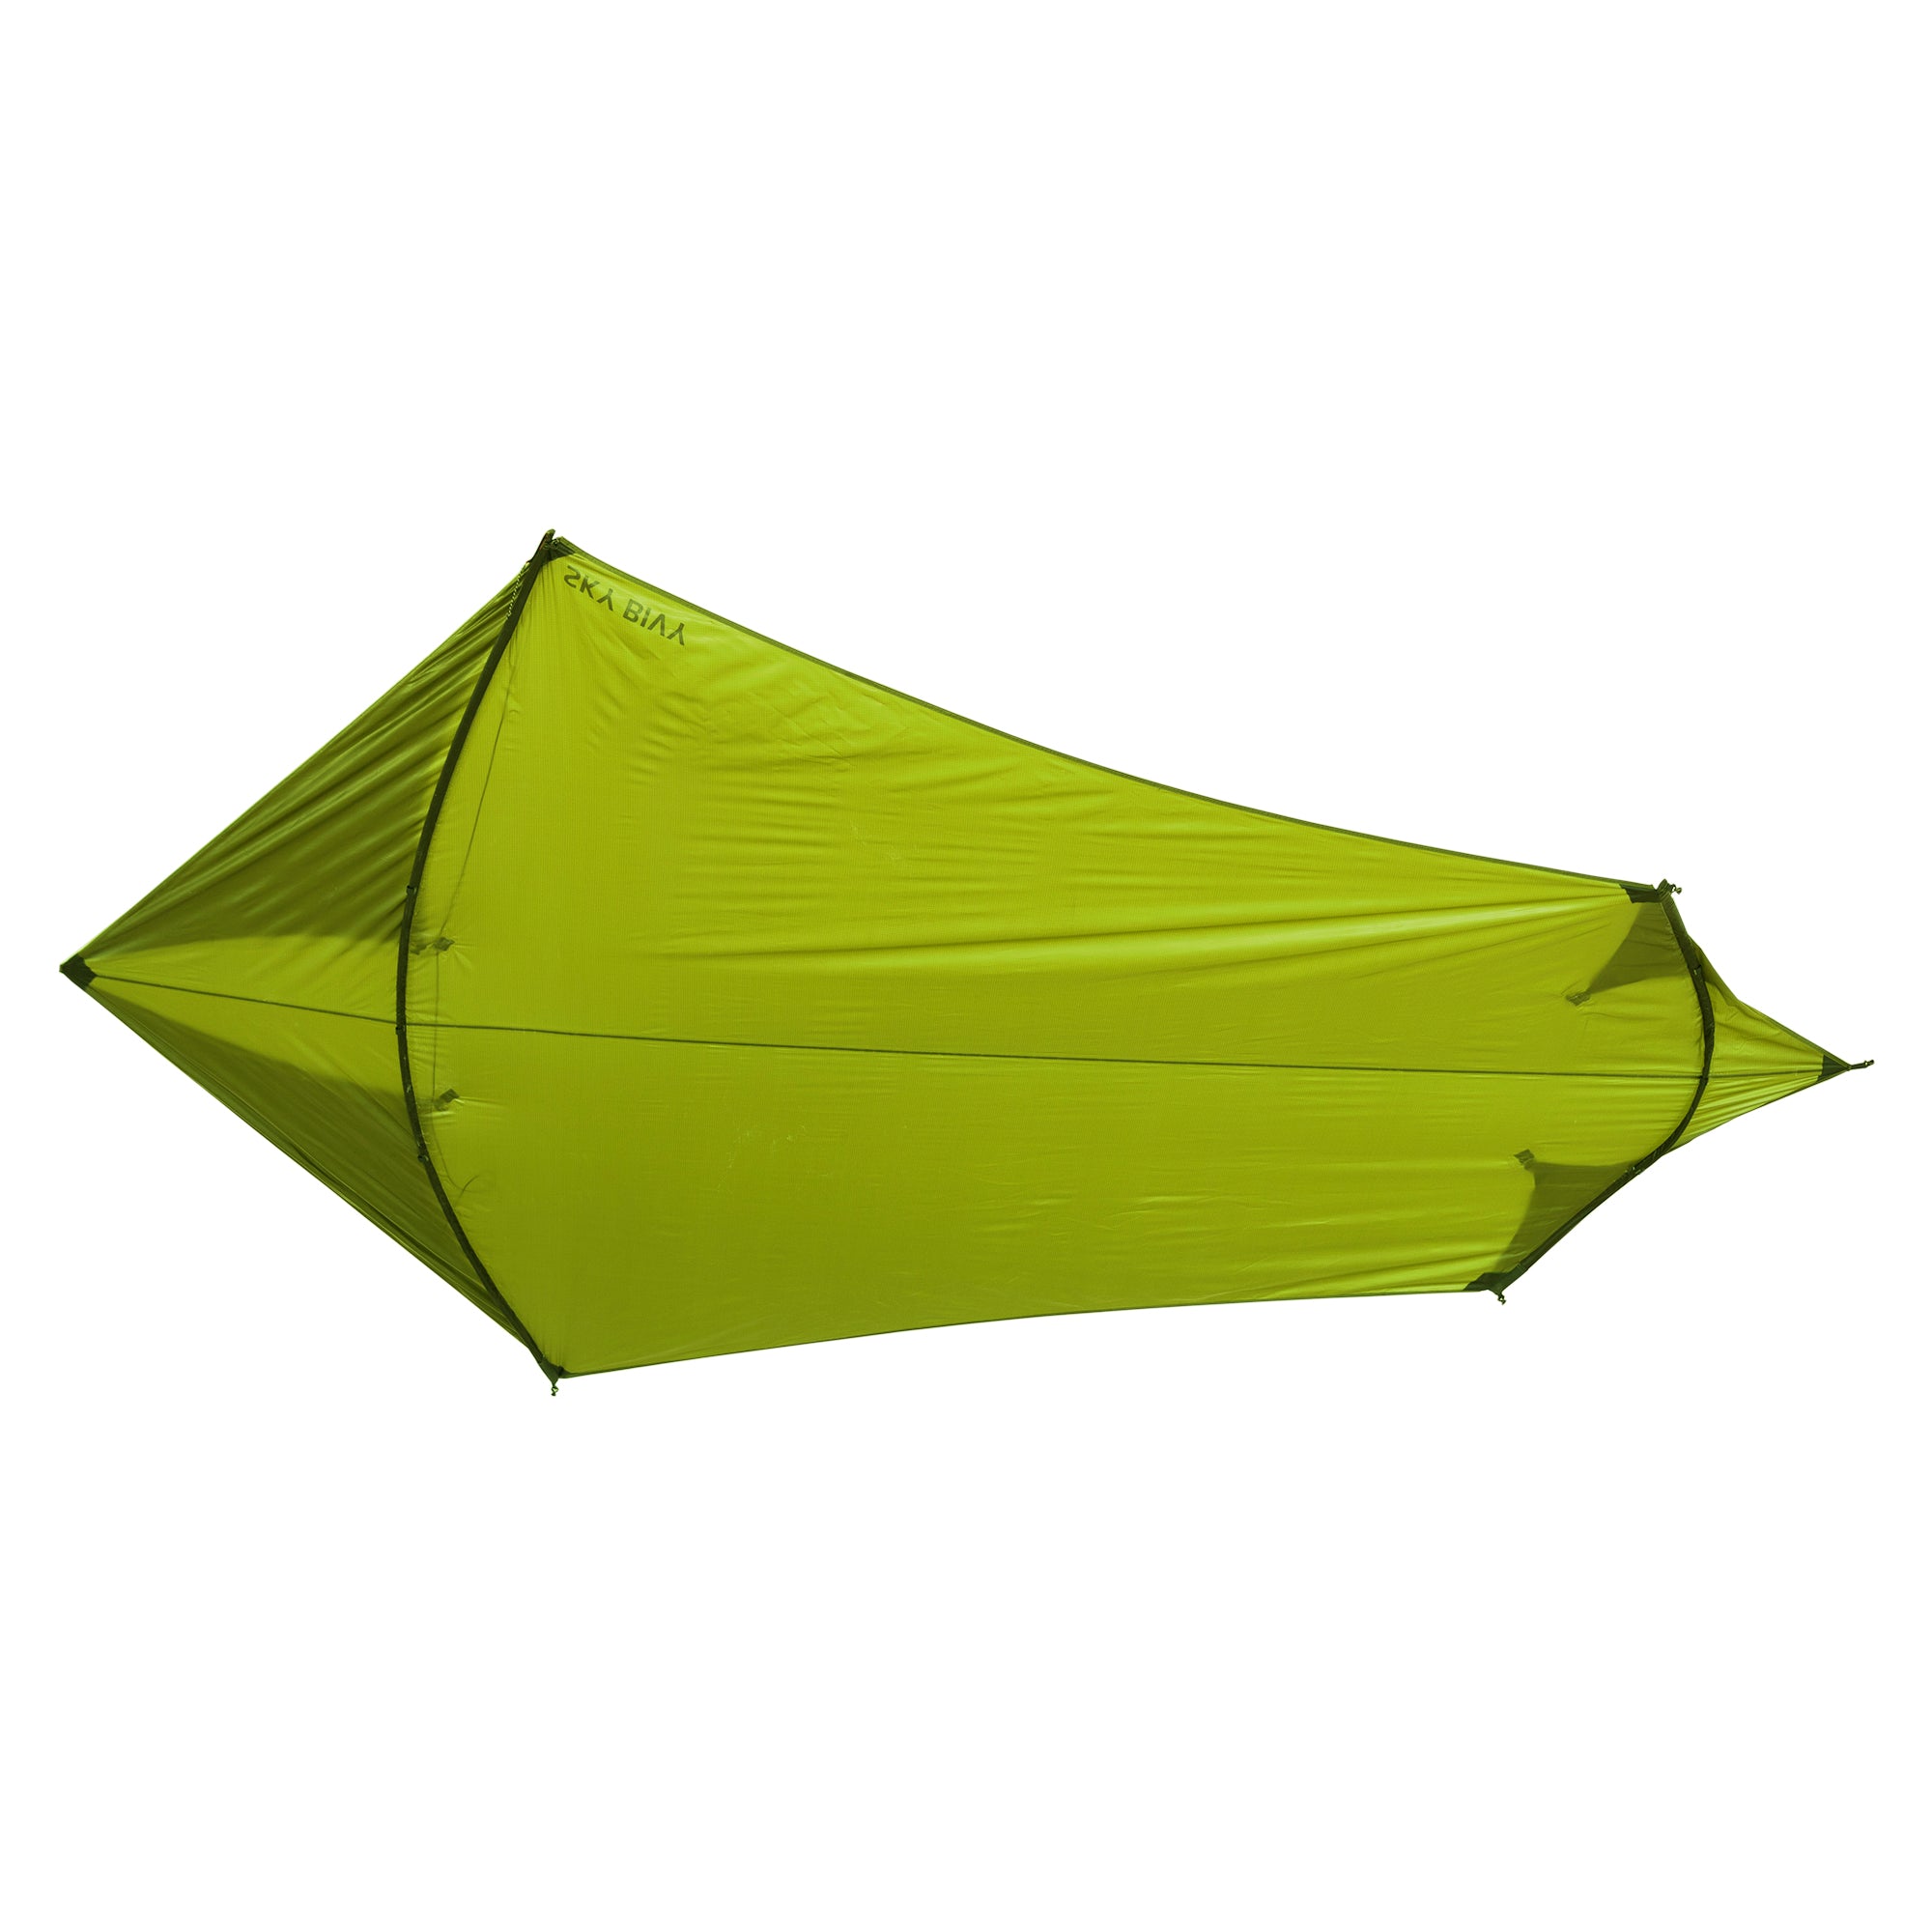 Sky Shelter Accessories